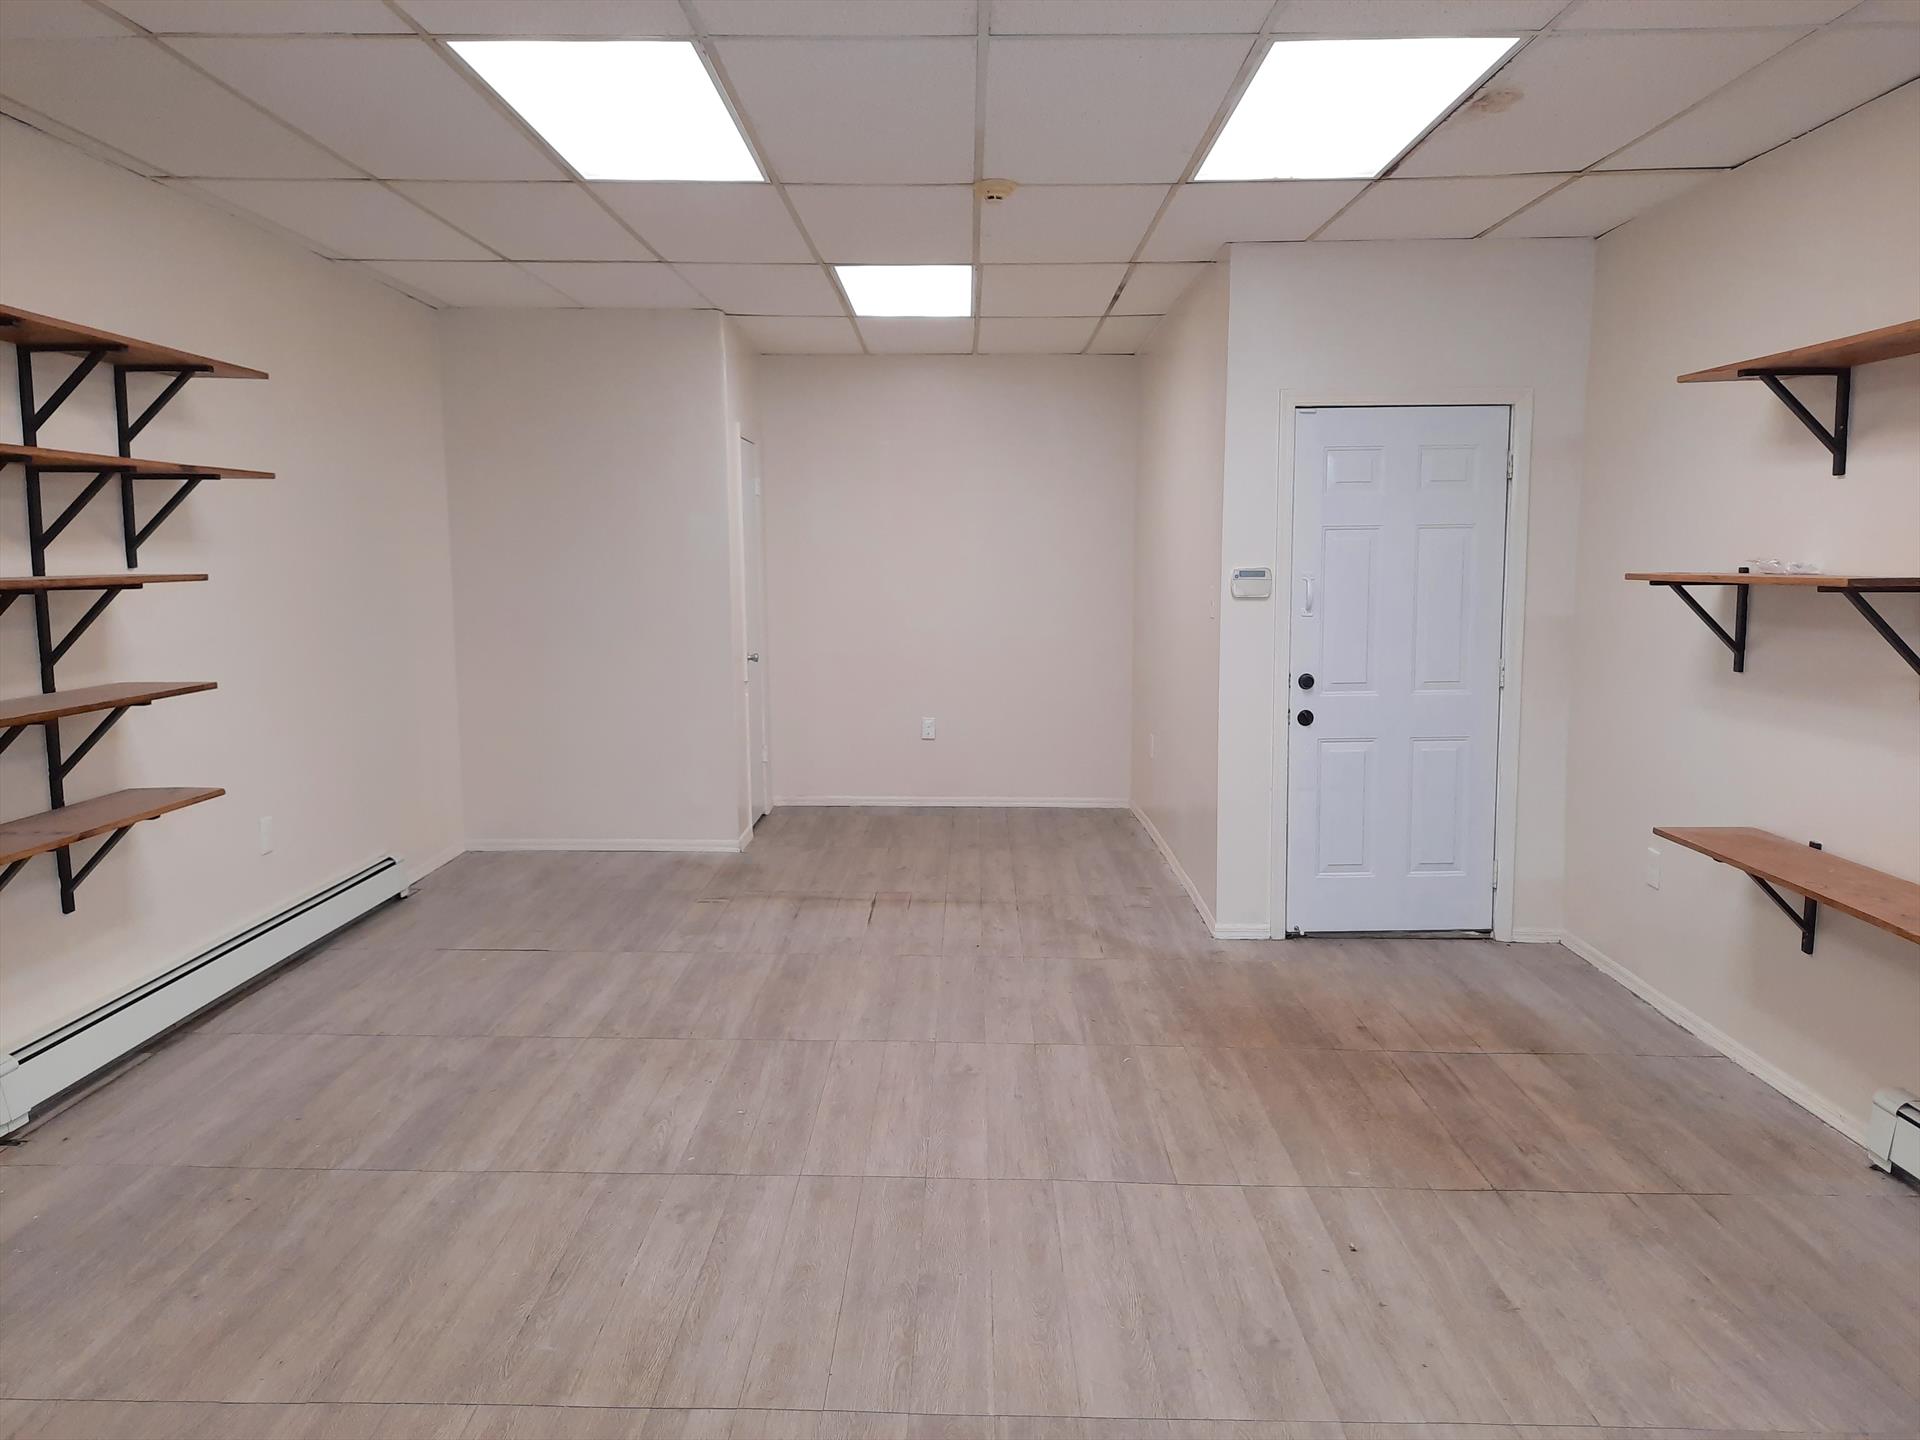 1/2 FEE PAID! Move your business into this lovely Downtown Union City commercial space located on Bergenline Avenue. Features: glass storefront, 2 separate rooms, one in the front and another in the back with small kitchenette with direct access to a large backyard. The front room is approximately: 23'x 17' and the back room is approximately 22' x 20'. Basement storage area included. One full bath and one half bath. Bergenline Avenue, also known as "Miracle Mile", has well over 300 retail stores, restaurants, banks, and has heavy foot and car traffic, and is easily accessible by car and public transportation. Union City is centrally located to Midtown Manhattan and is easily accessible by car and public transportation. Tenant pays their own utilities and is responsible for 33% of water / sewer bill. AVAILABLE ASAP. To make this property yours: $1575 (1st months rent), $3150 (security deposit), $1575 (1/2 broker fee / the landlord pays the other 1/2).